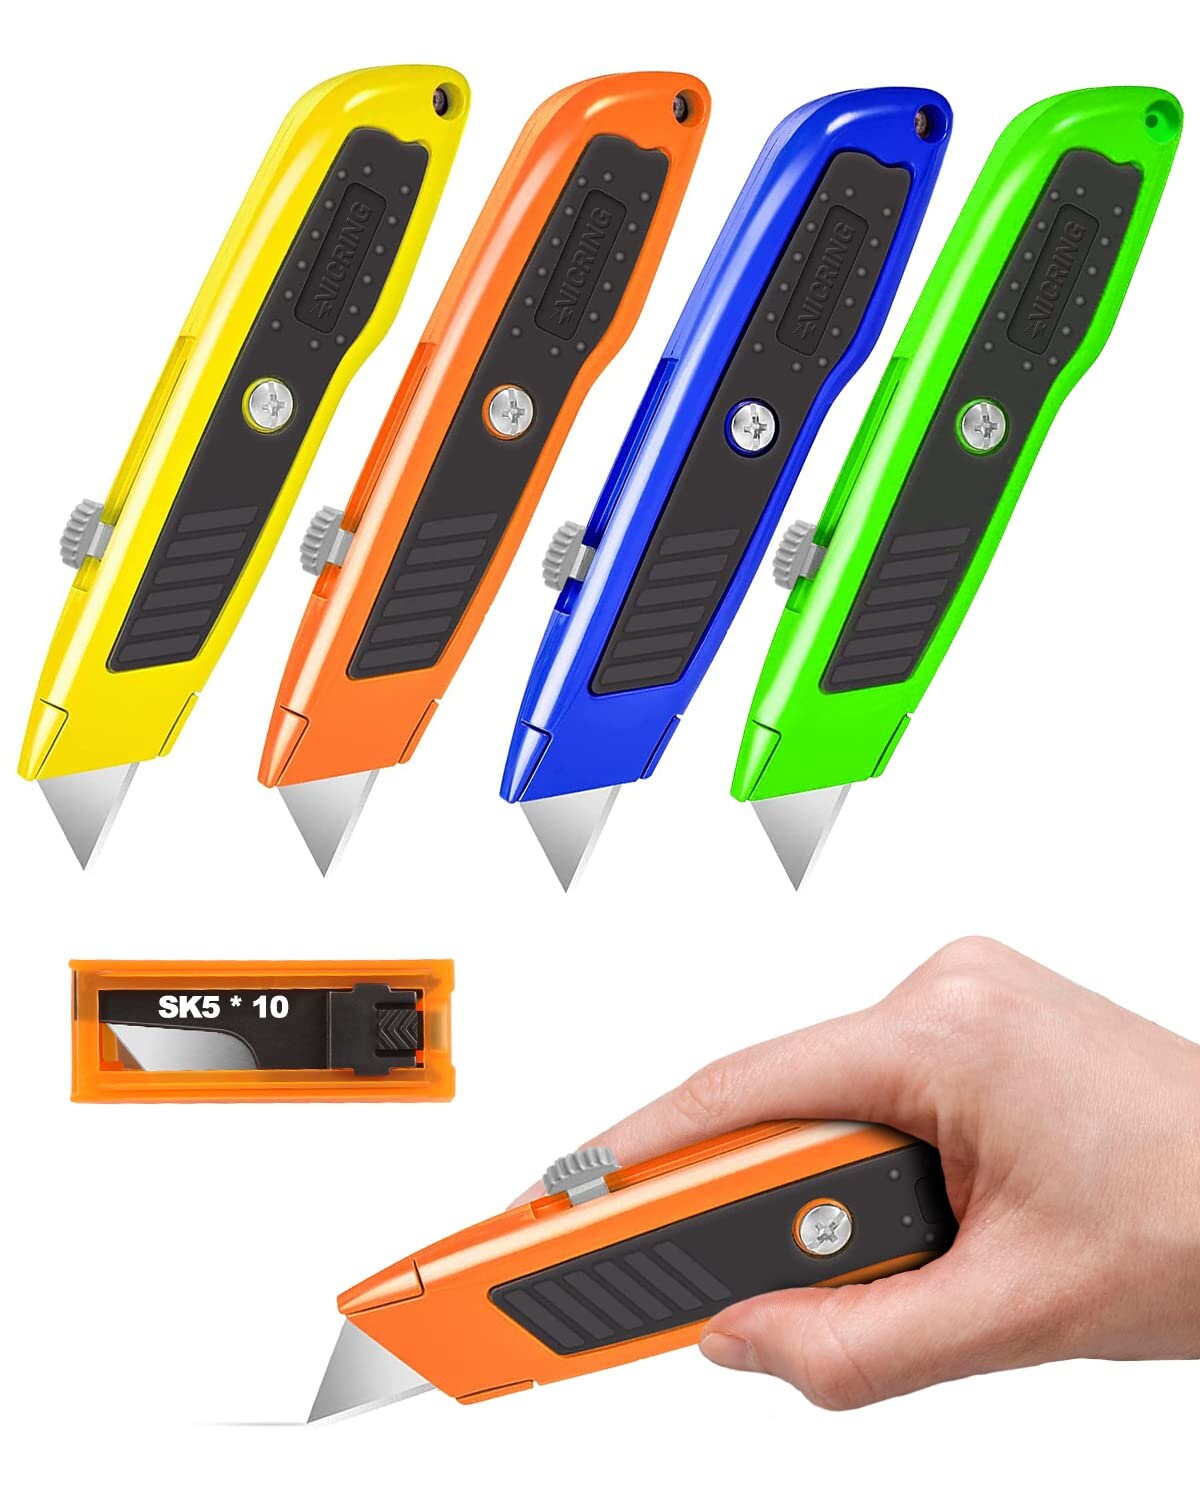 DIYSELF 4 Pack Box Cutter, Box Cutter Retractable for Cardboard, Papers and  Plastics. 18mm and 9mm Utility Knife, Razor Knife, Portable Utility Knives